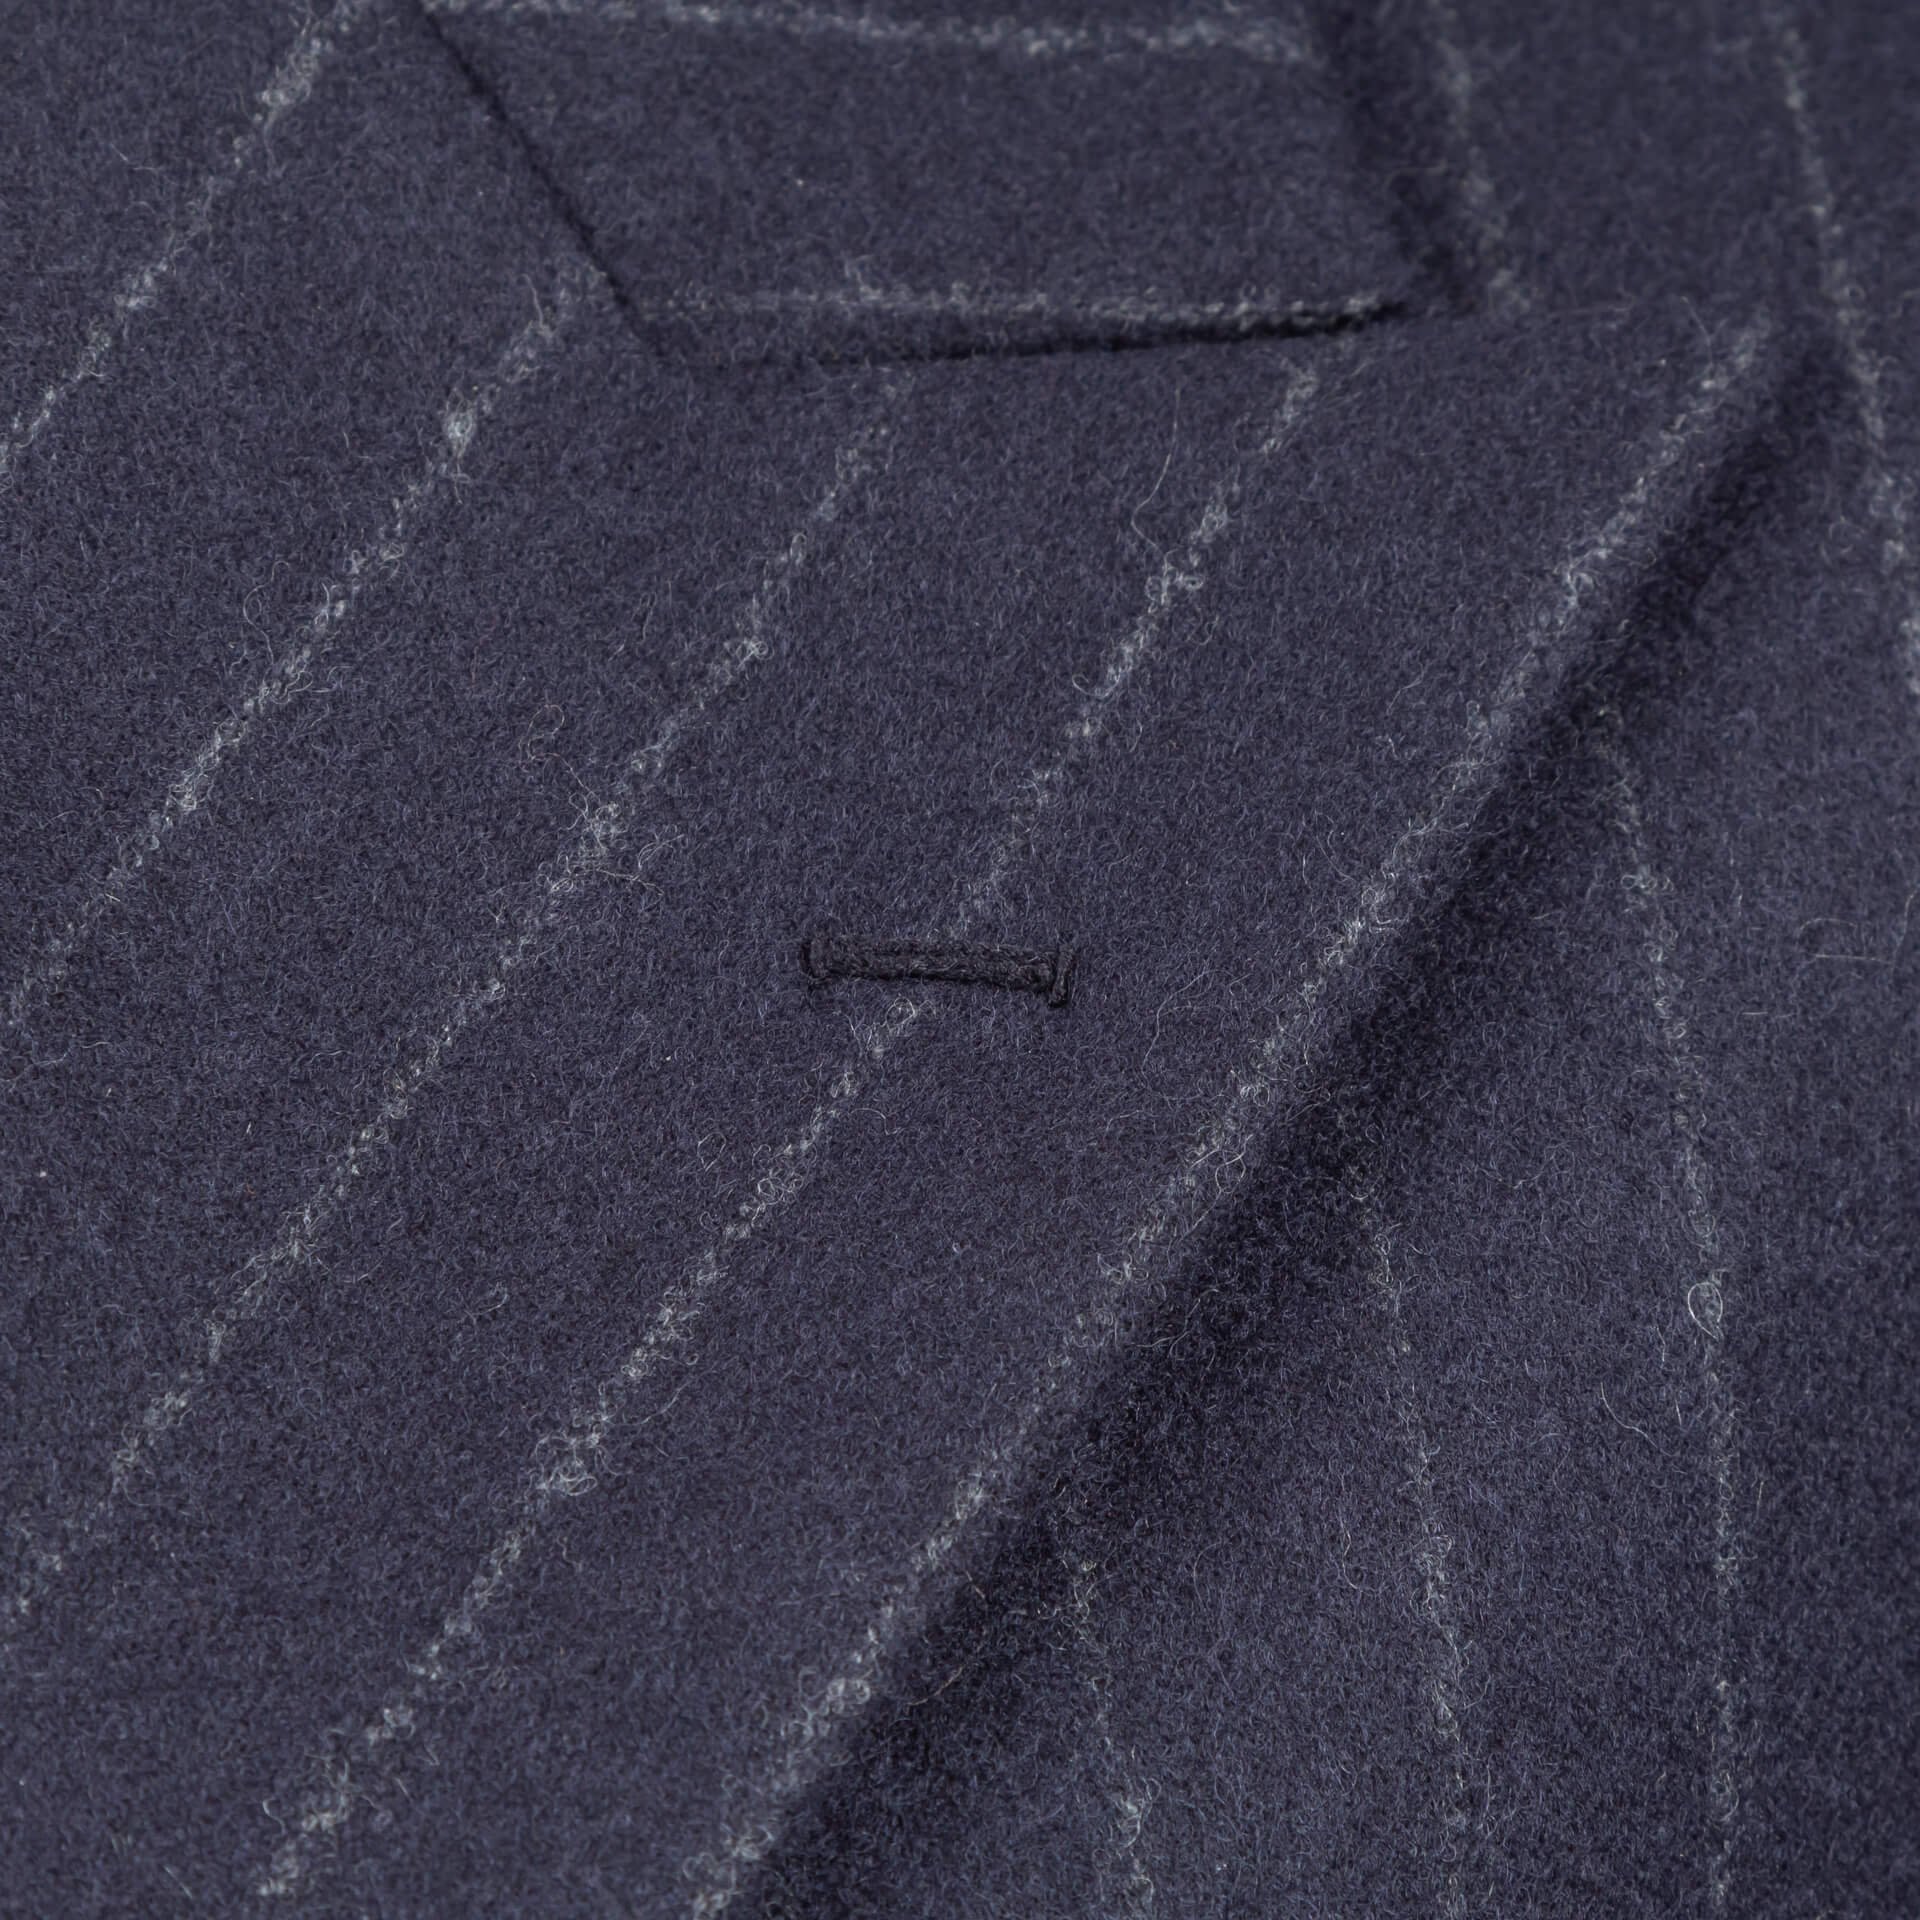 Ladies Suit Double Breasted Chalk Stripe Flannel